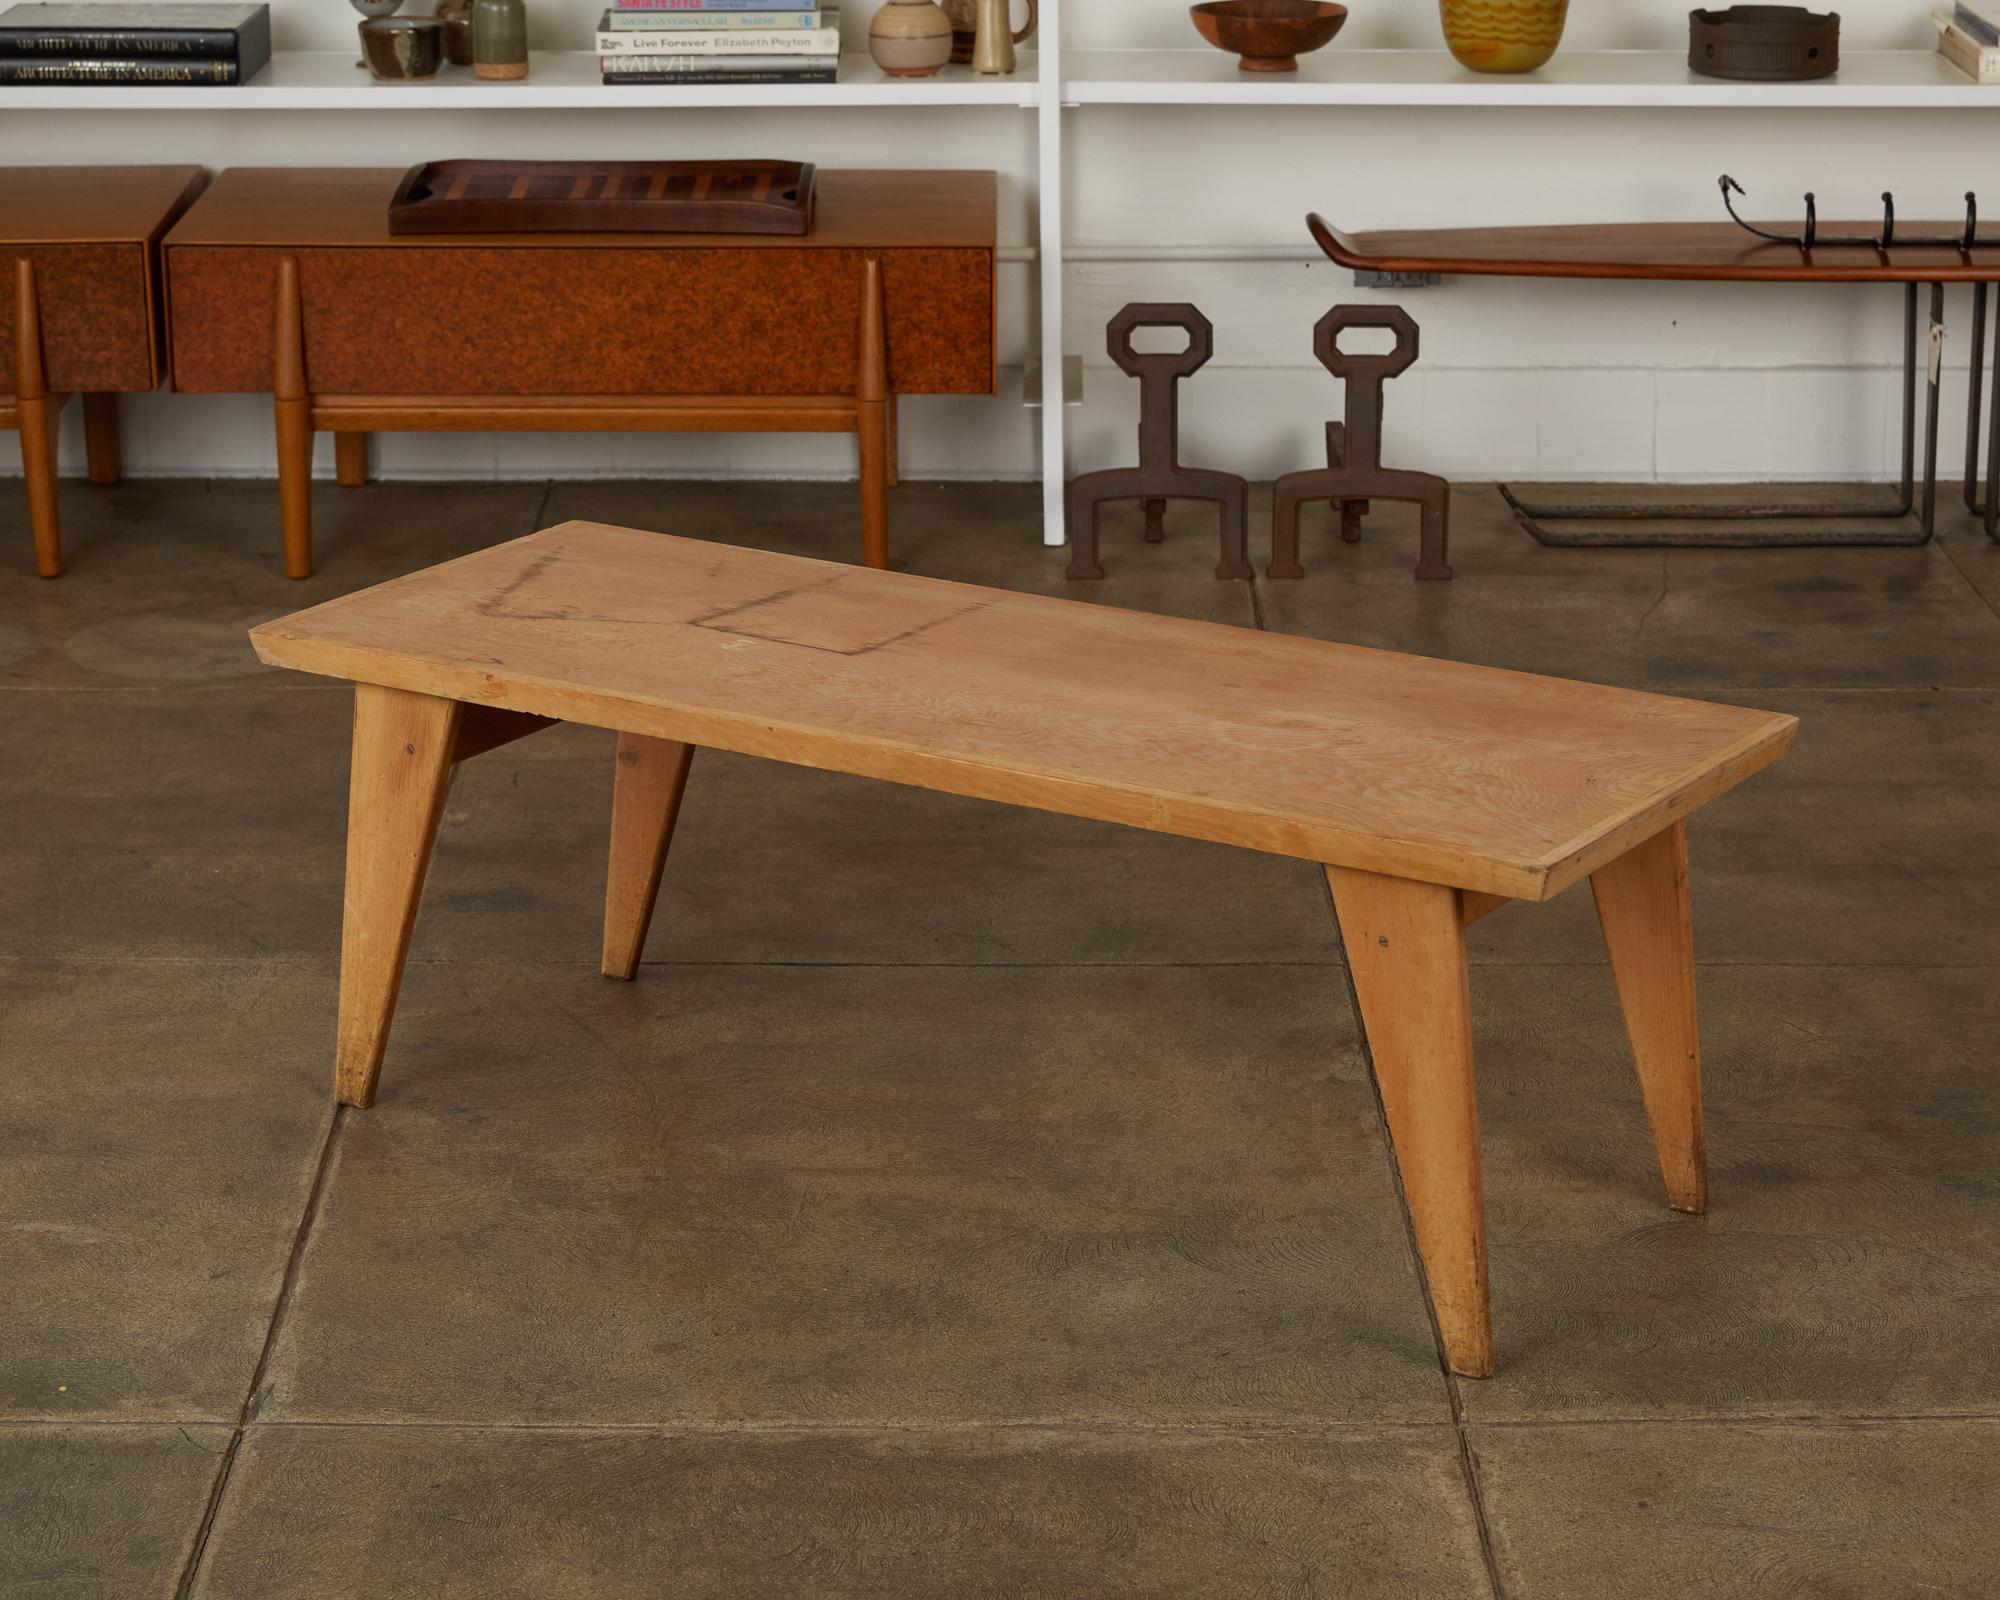 You know those rare pieces of furniture you find that show just the perfect amount of age? This is one of those. This coffee table has a pine plywood top, back when you could get pine veneer so that the grain ran continuously across the entire